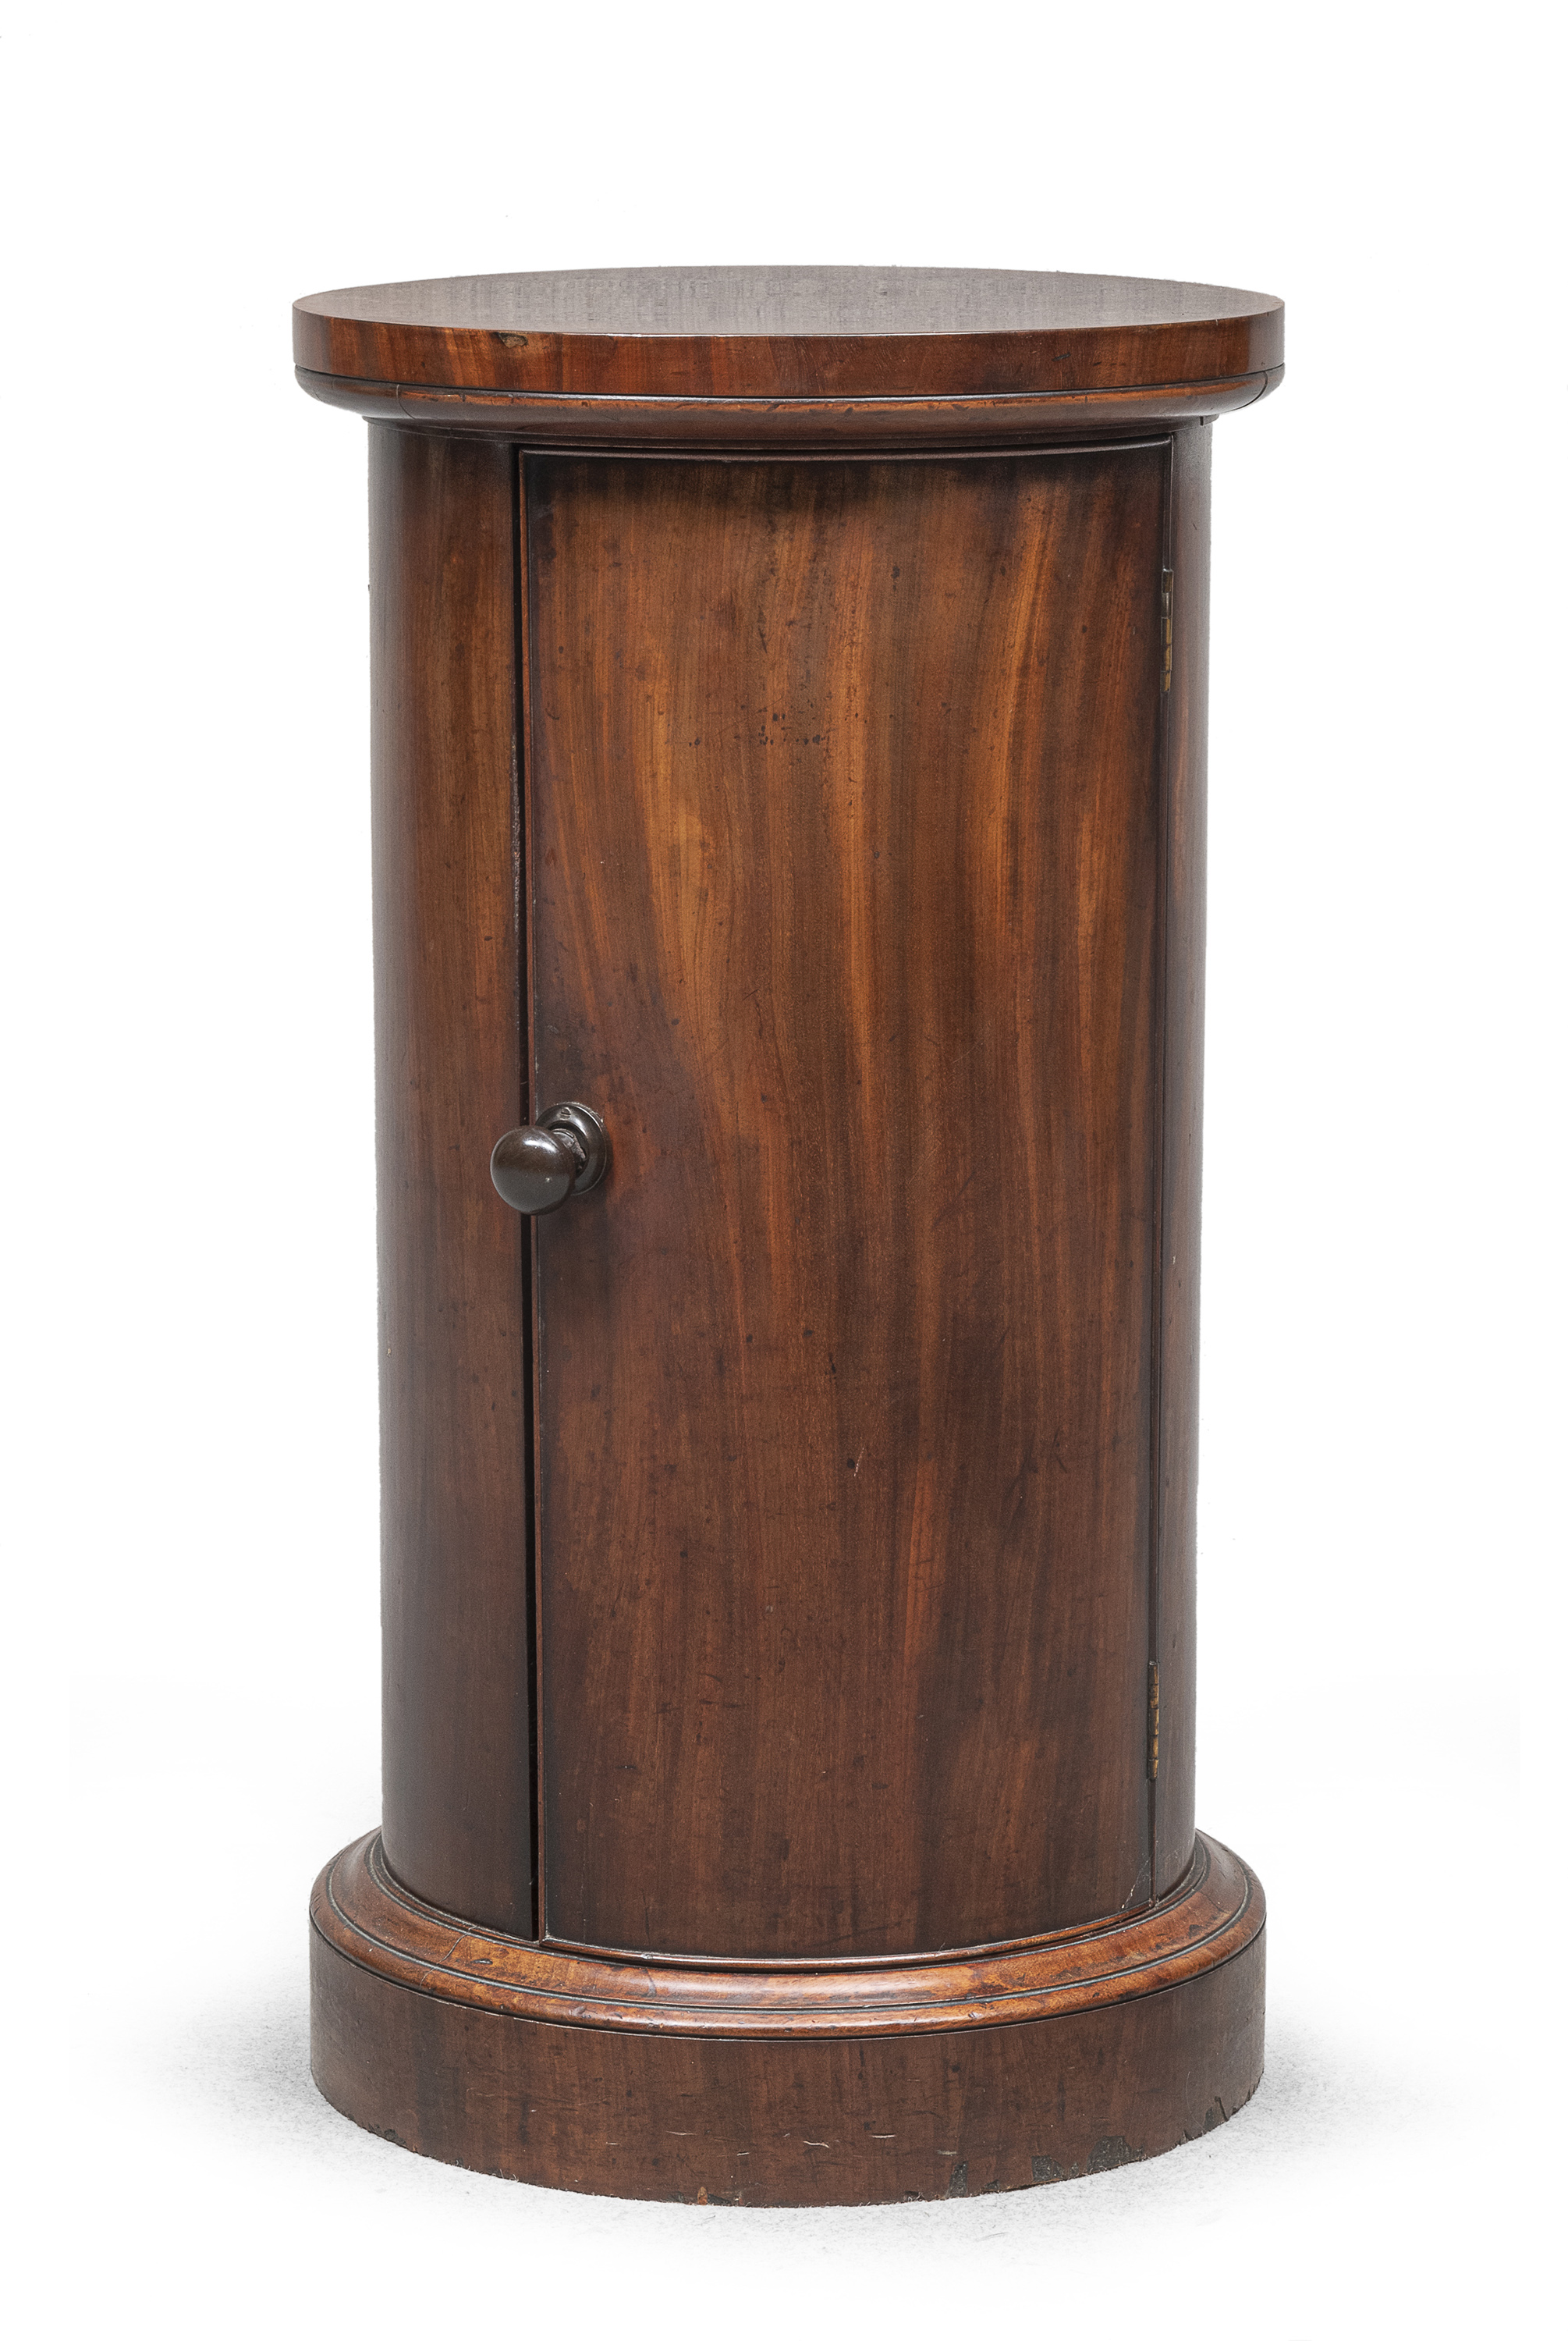 MAHOGANY CYLINDER BEDSIDE TABLE LATE 19TH CENTURY